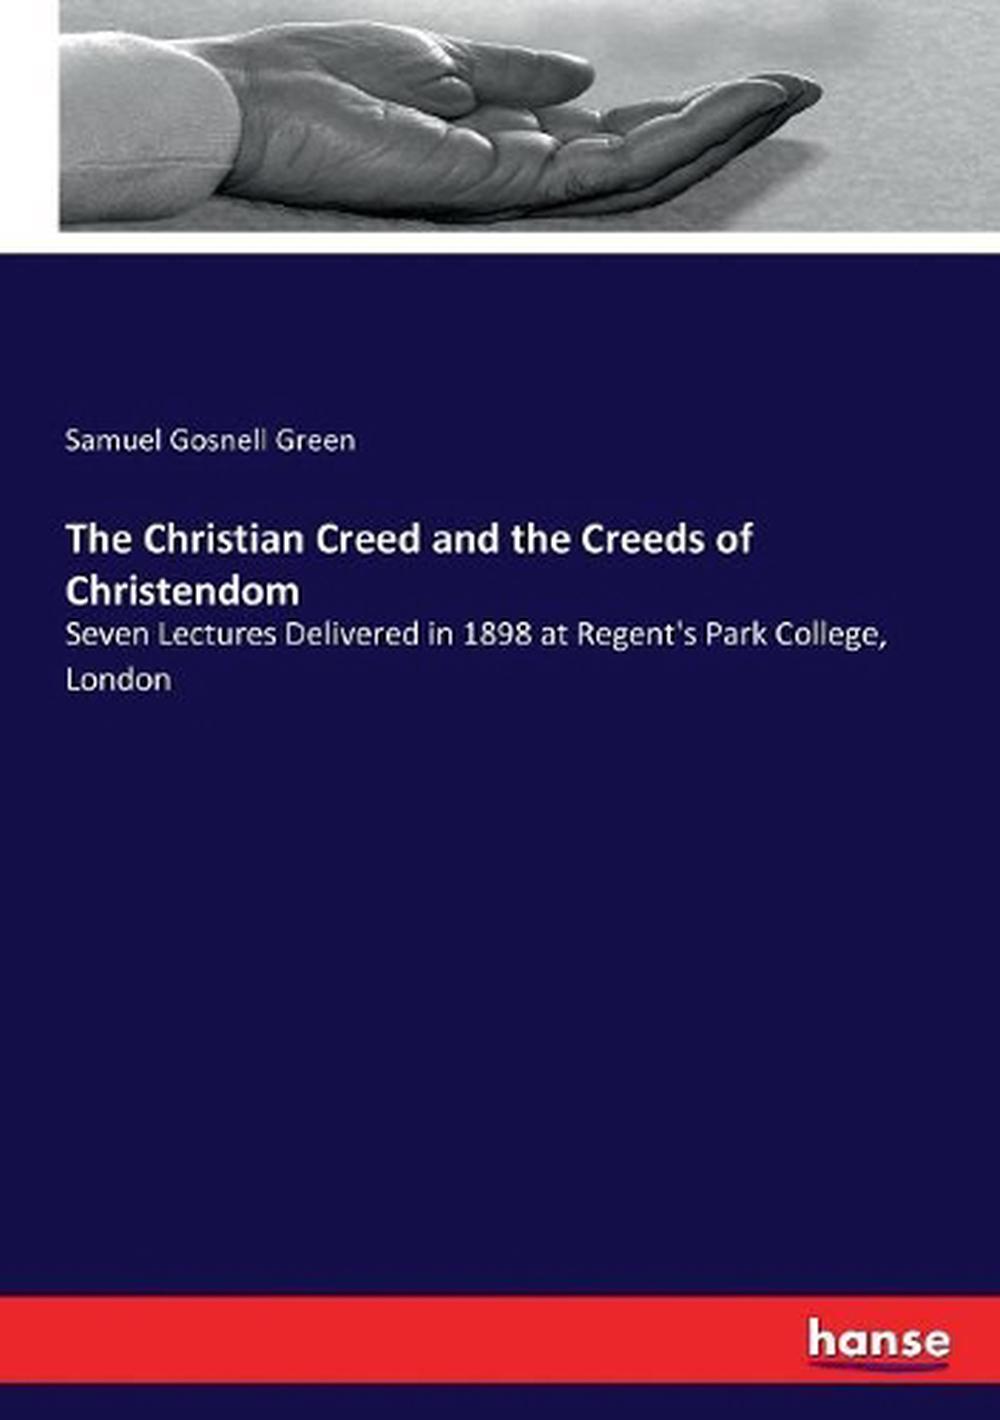 Christian Creed and the Creeds of Christendom by Samuel Gosnell Green ...